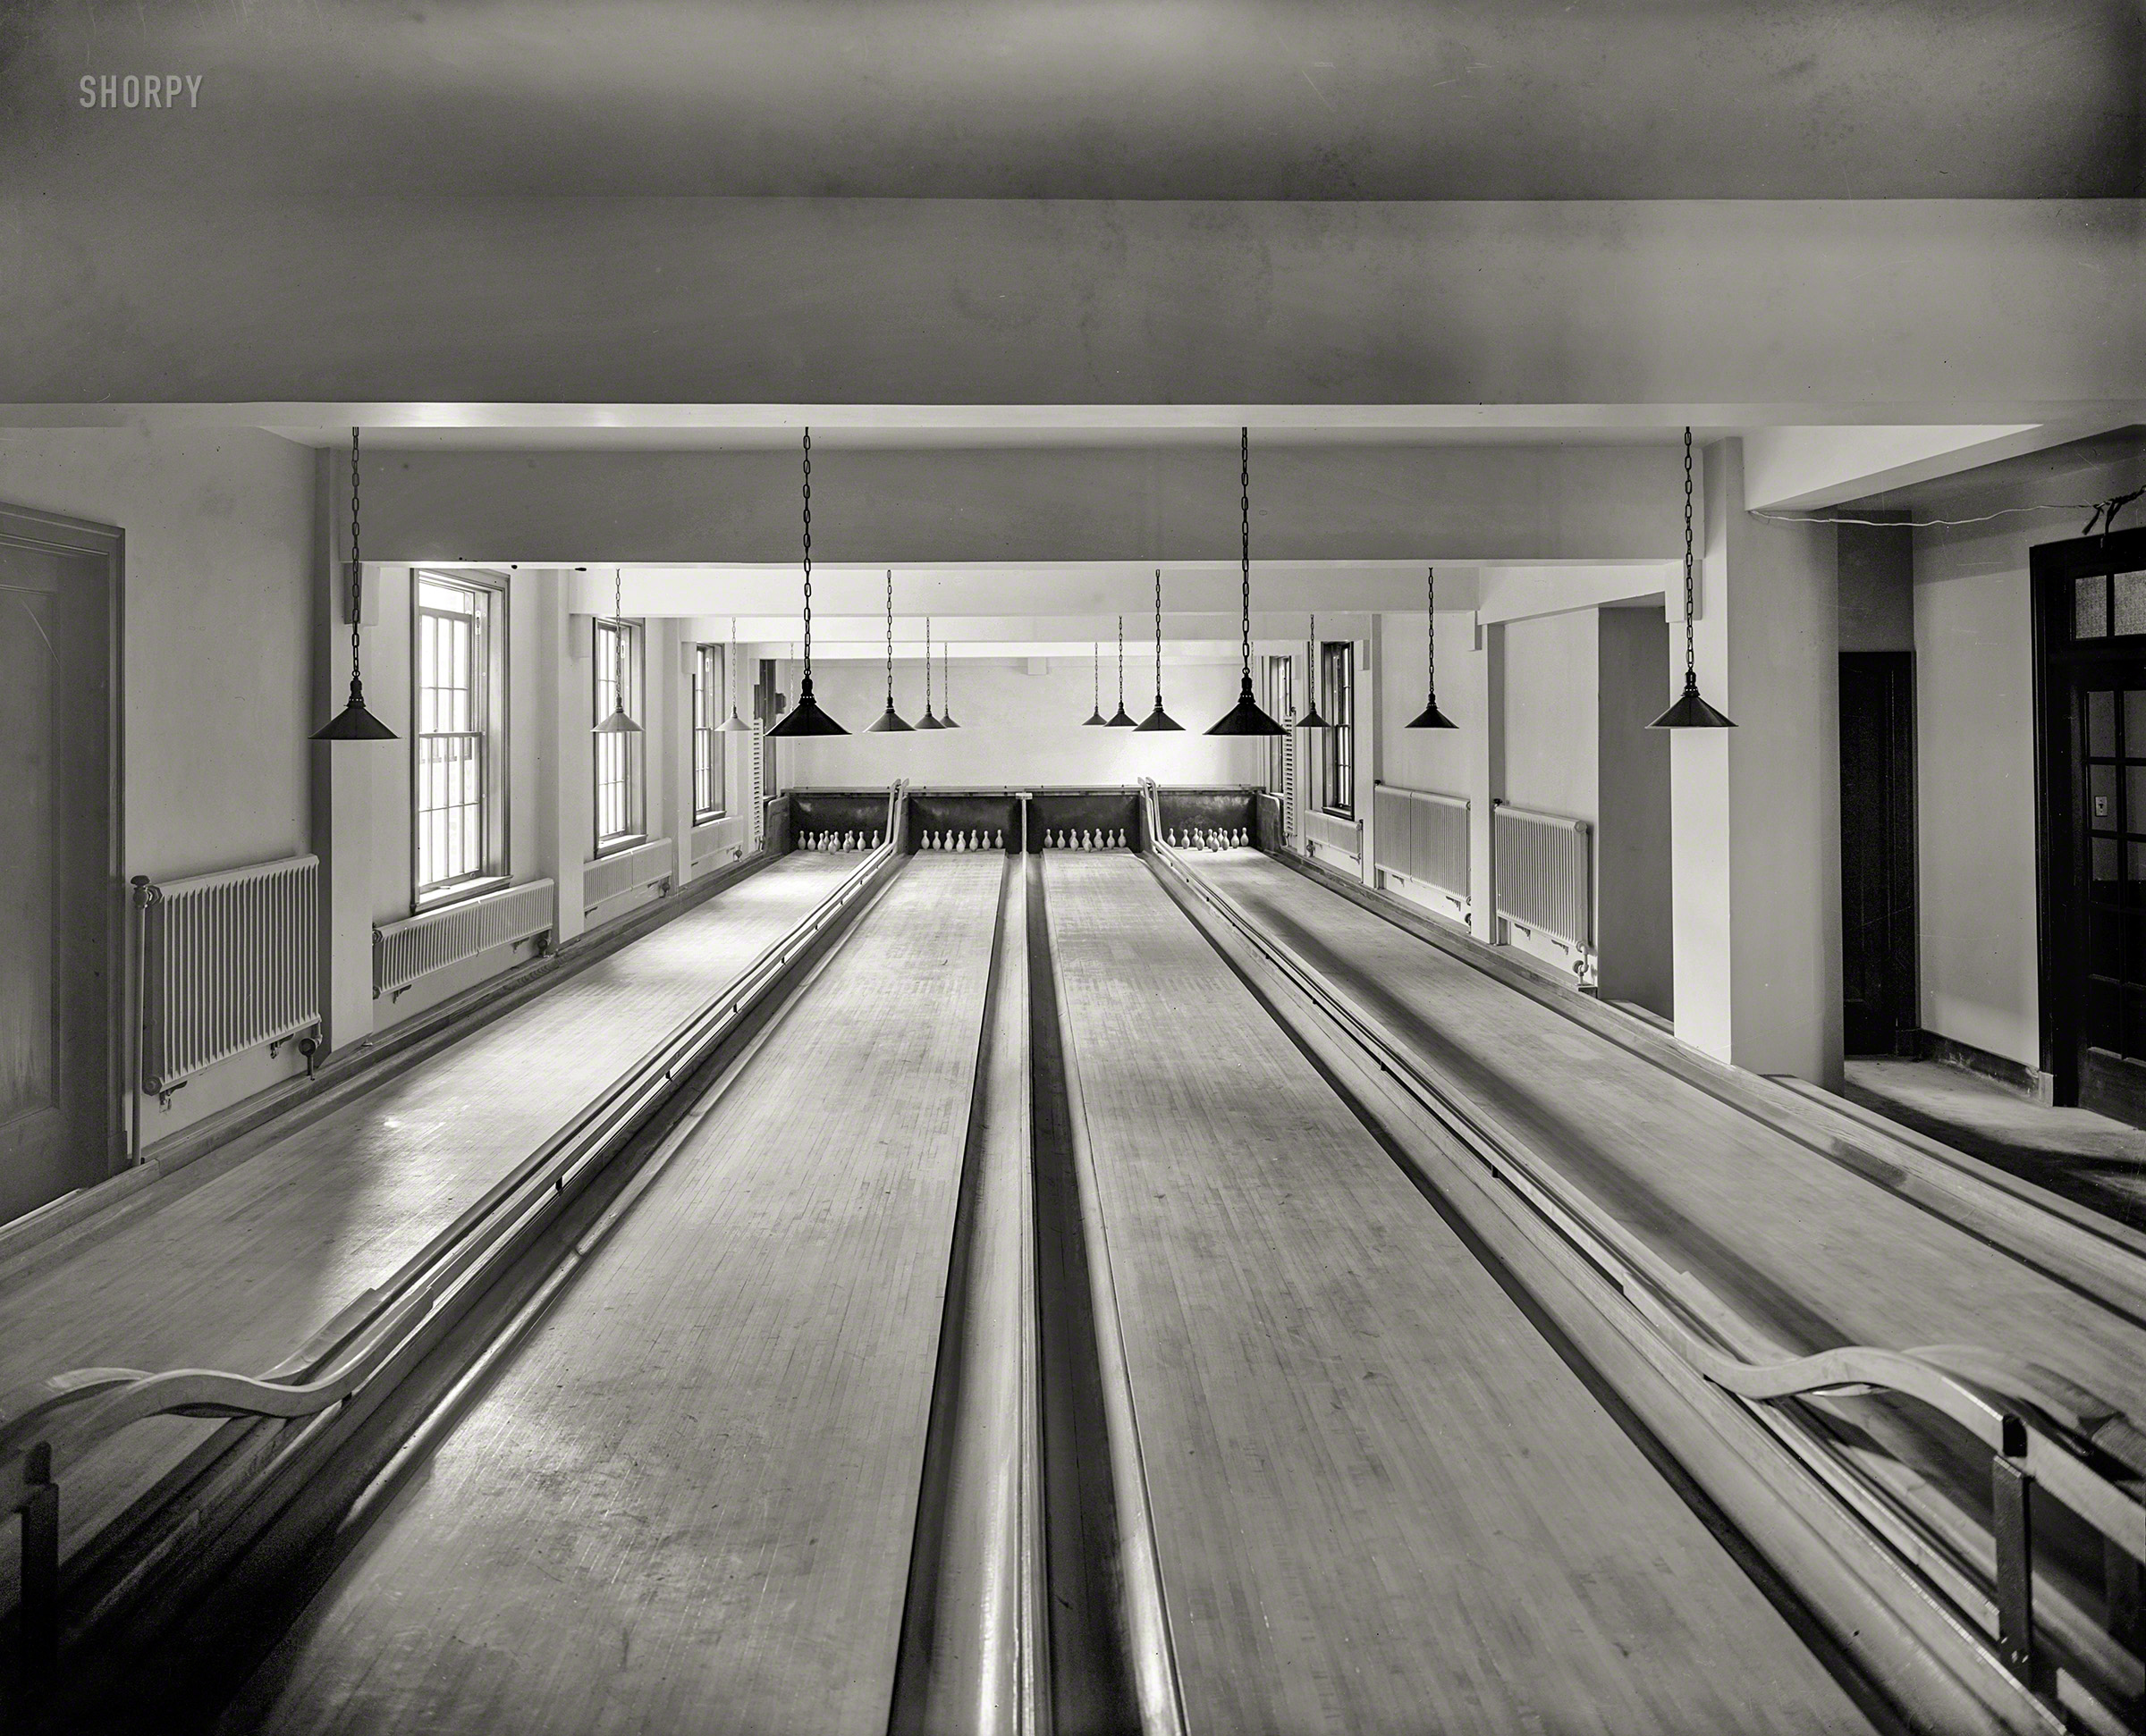 Washington, D.C., circa 1926. "Jewish Community Center bowling alley." National Photo Company Collection glass negative. View full size.